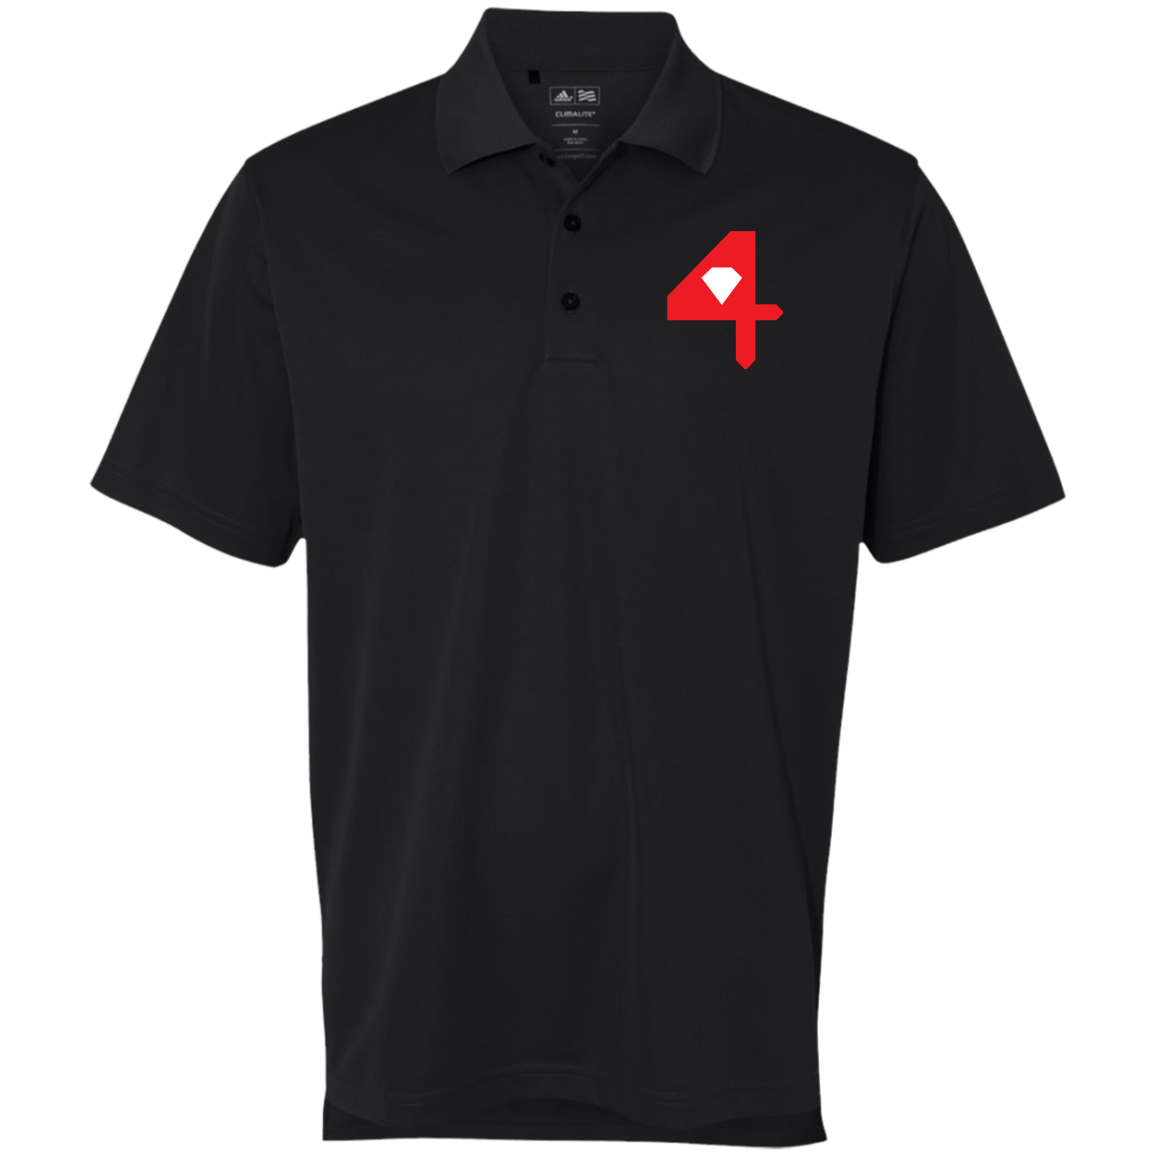 Adidas Red "4" Golf ClimaLite Polo